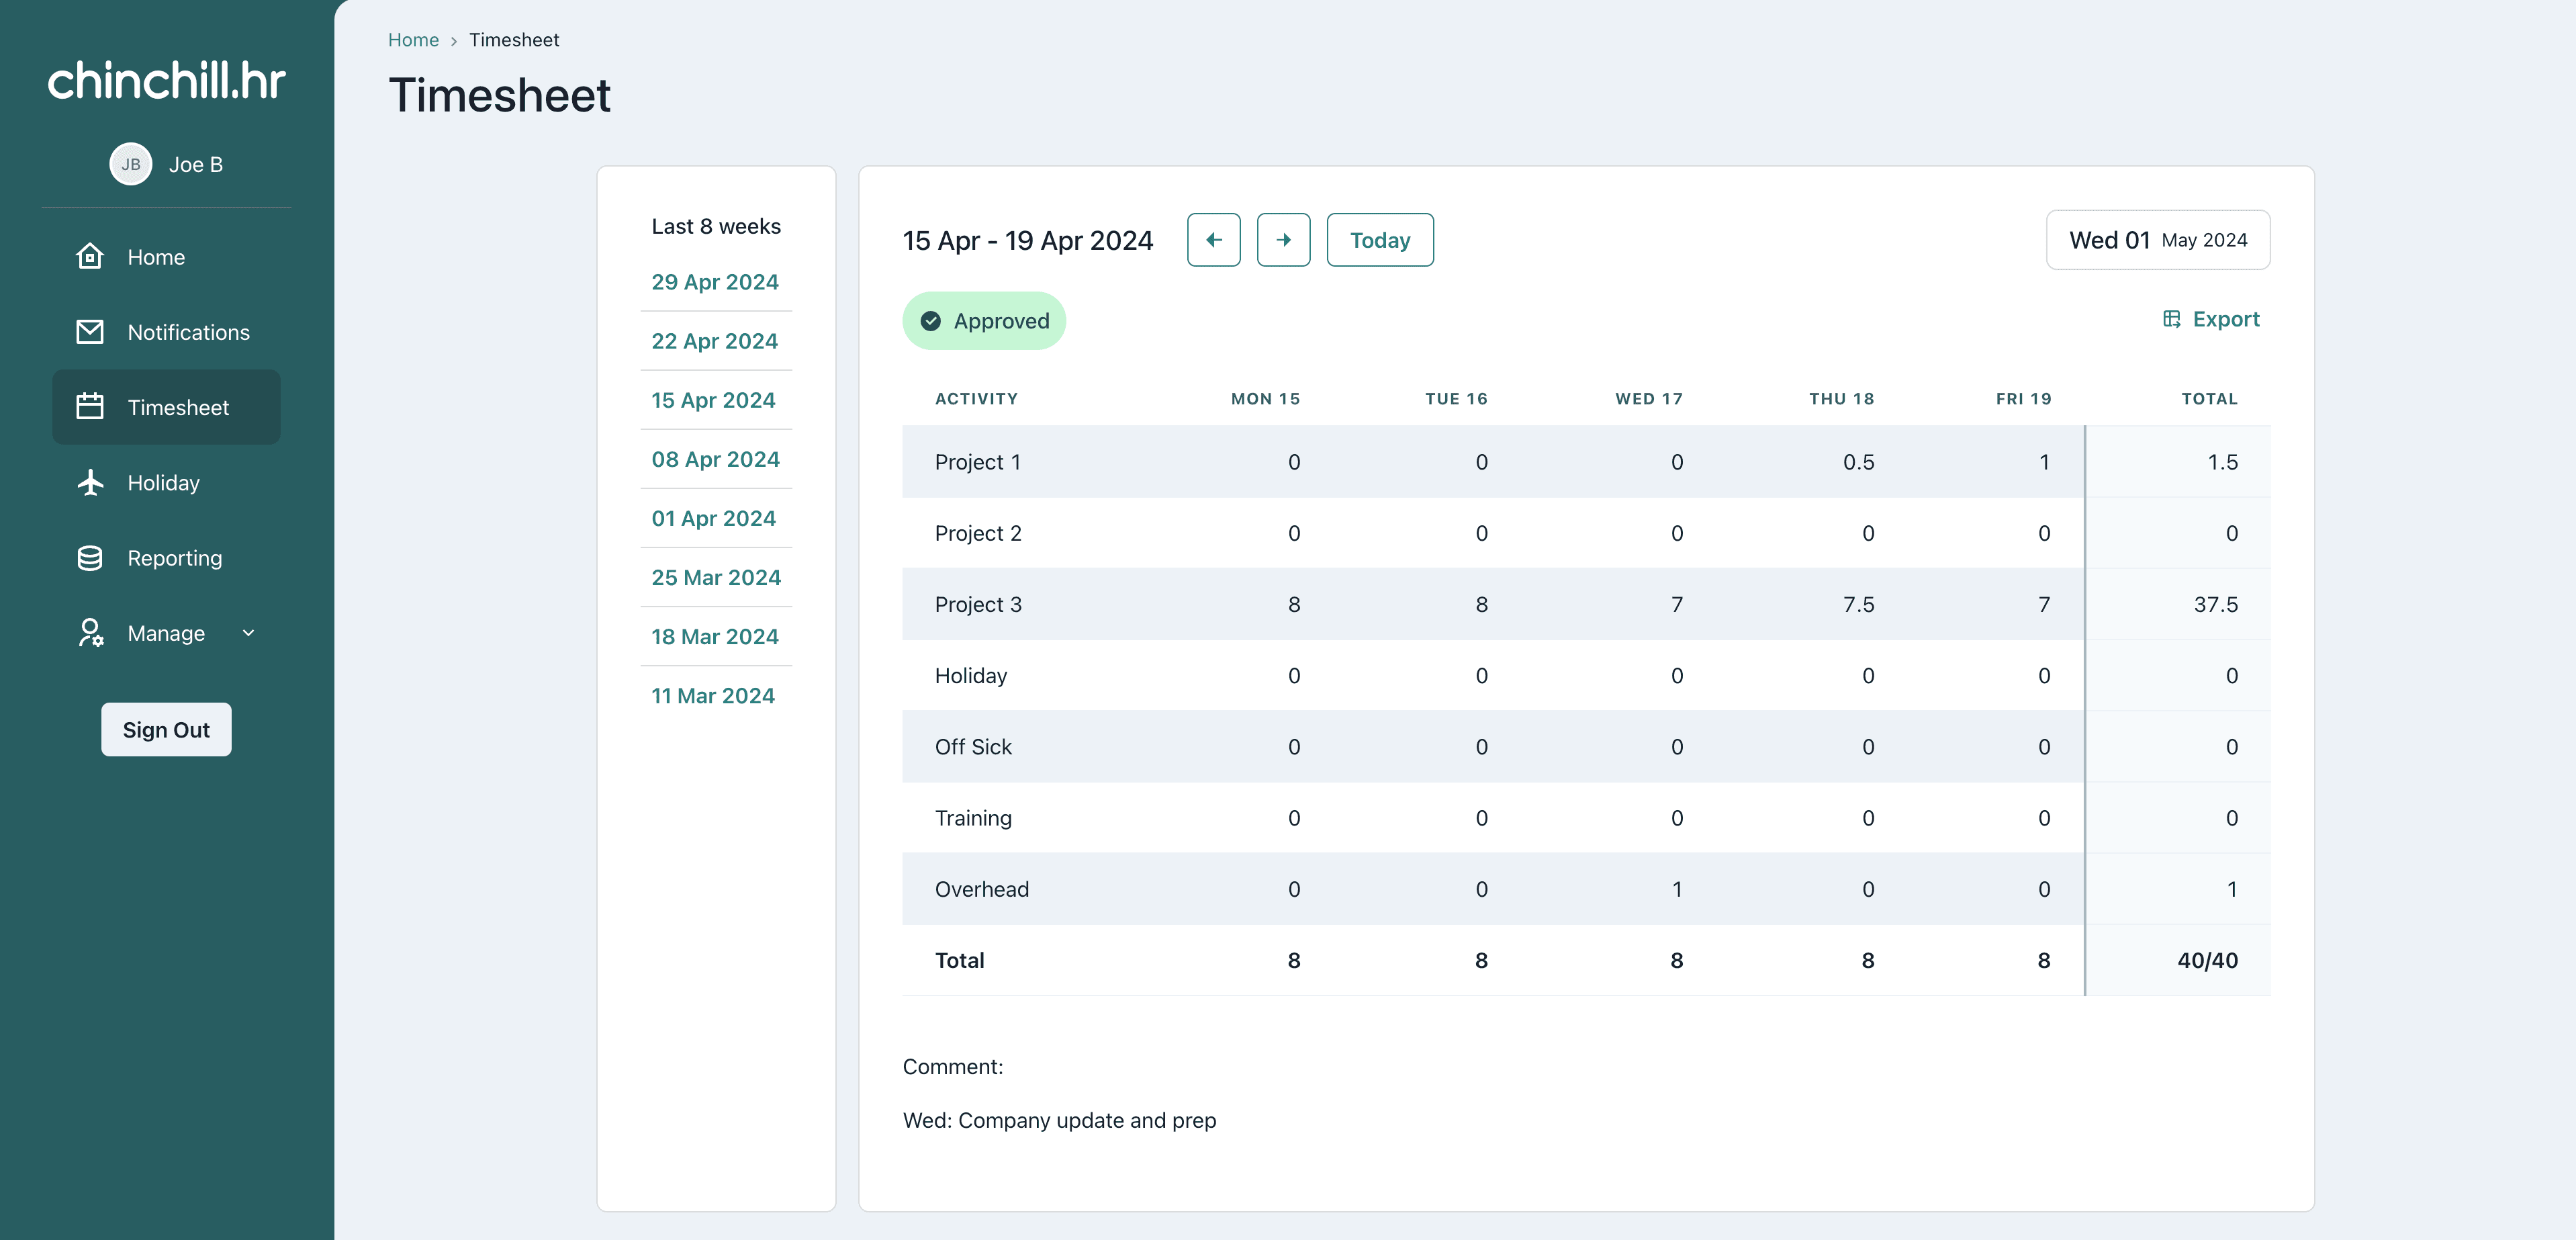 Picture of Chinchill.hr app timesheets